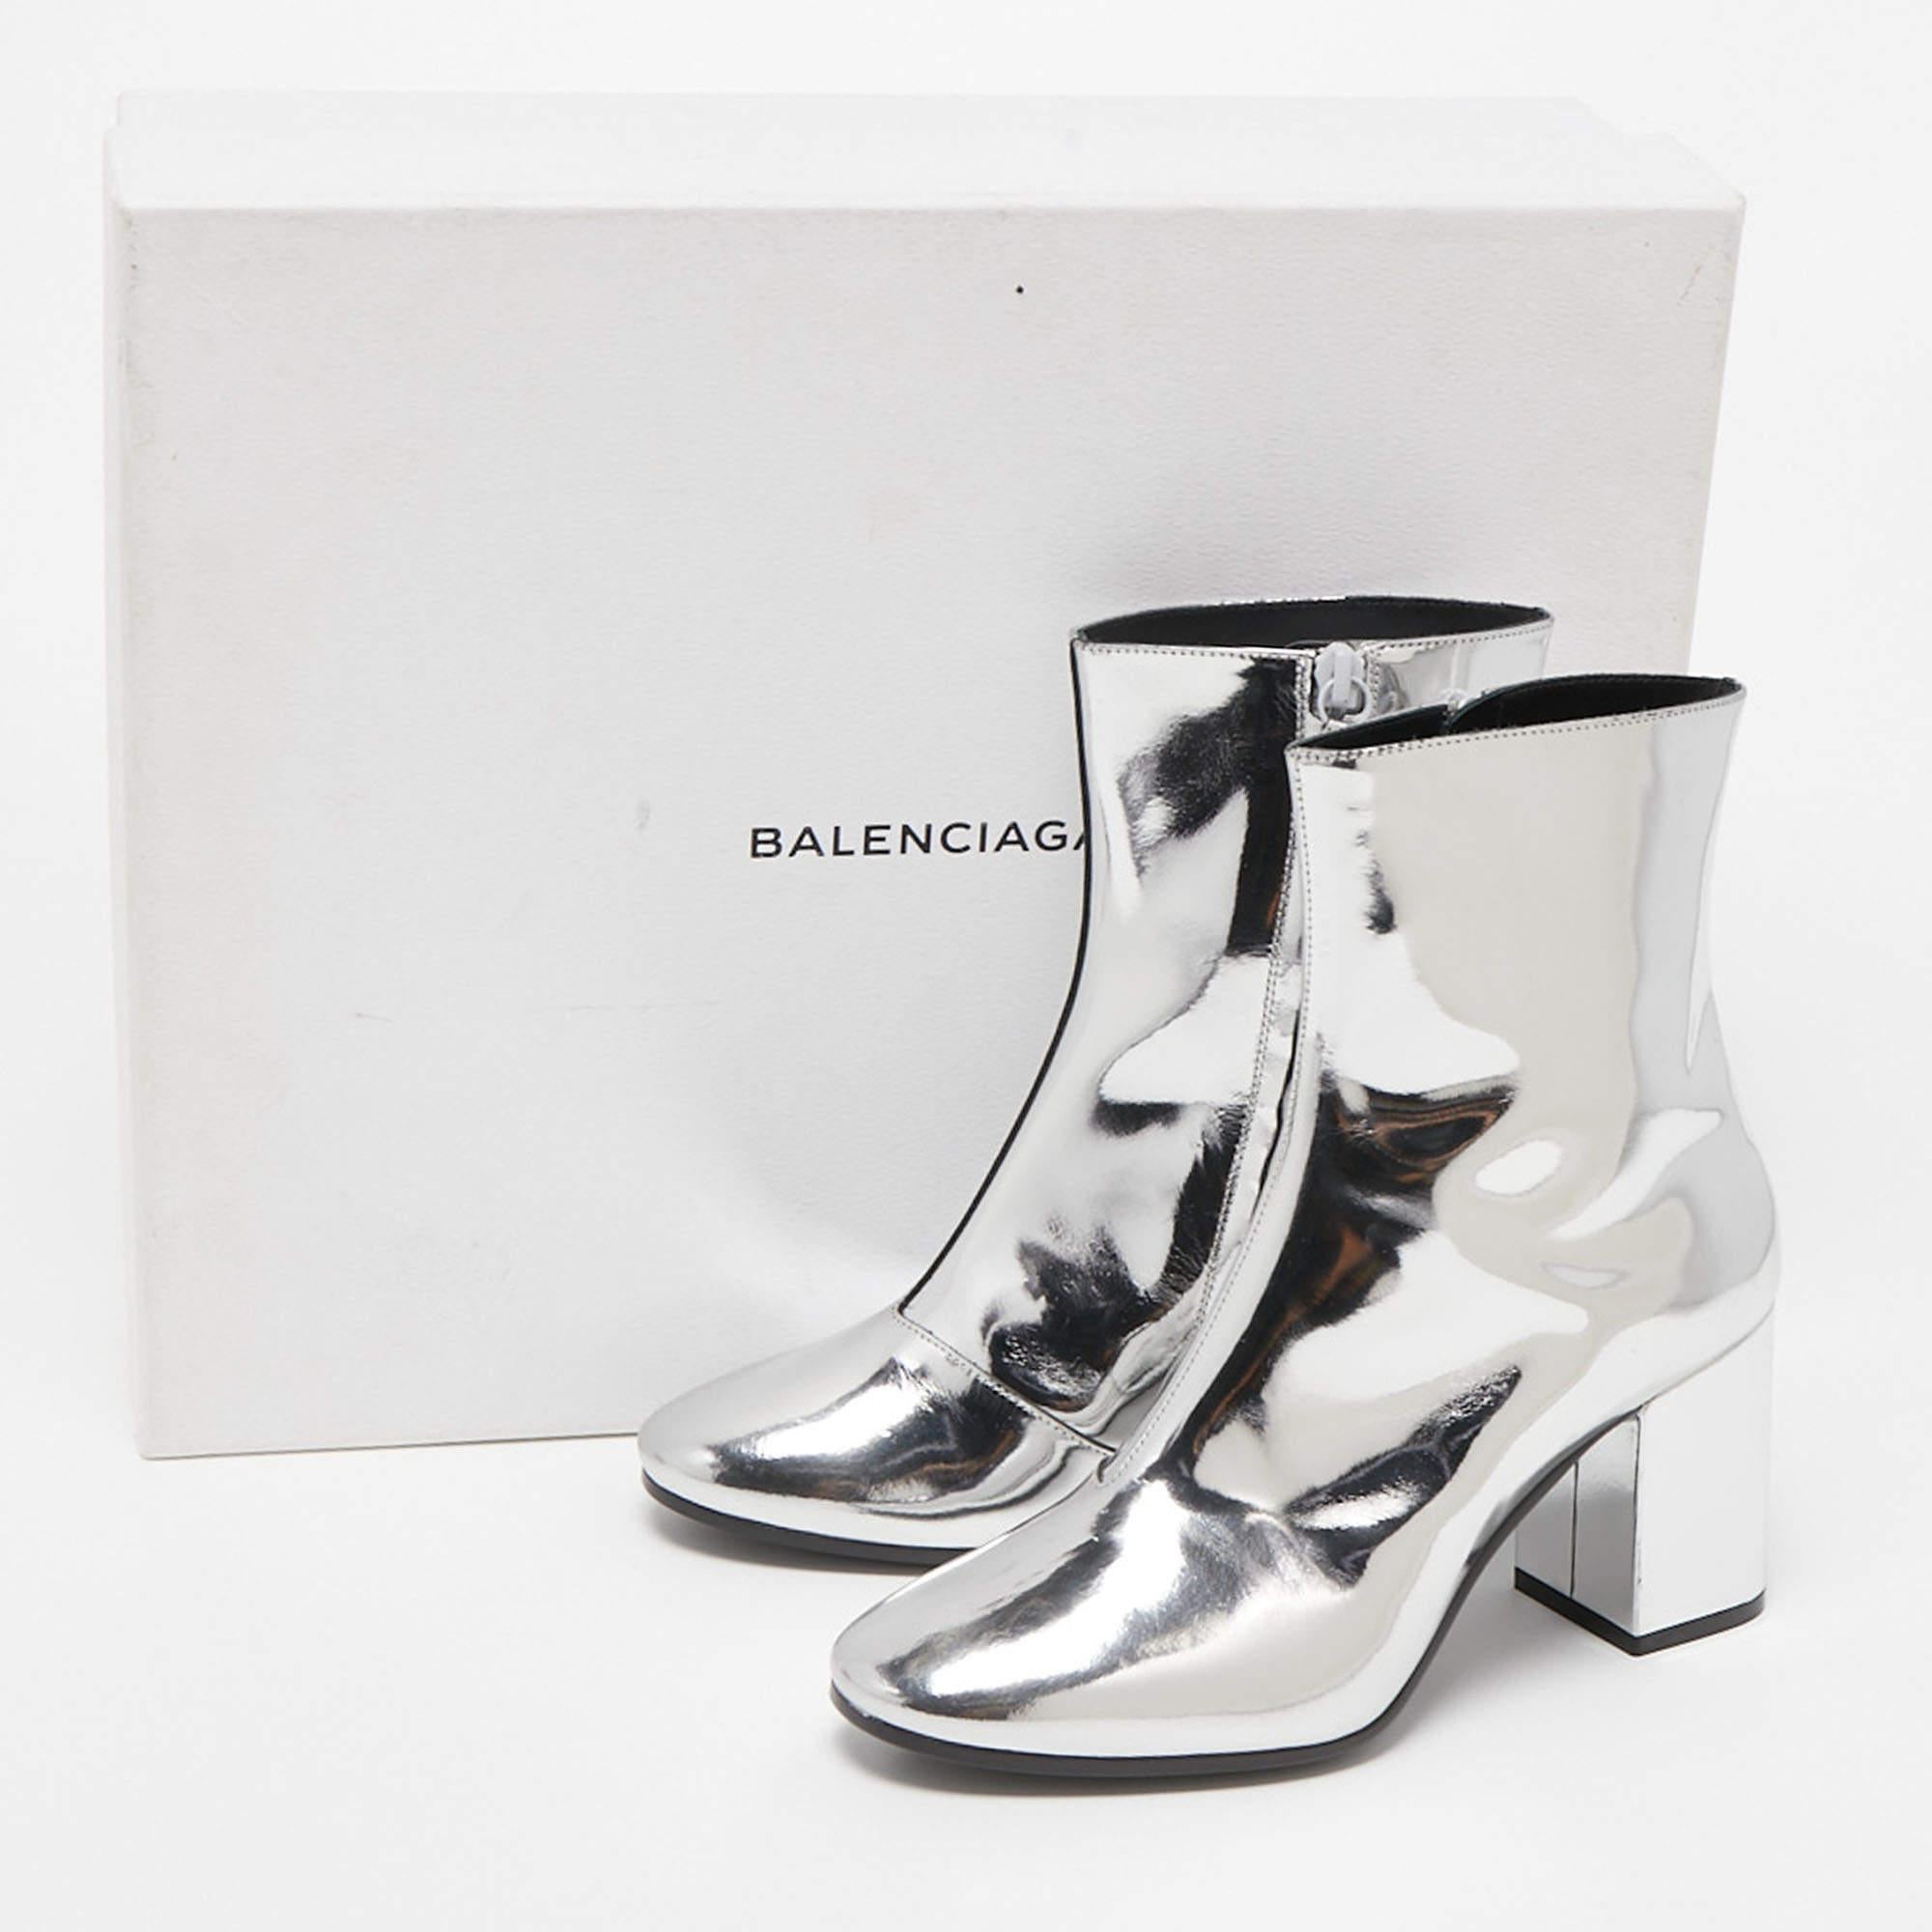 Balenciaga Silver Foil Leather Block Heel Ankle Boots Size 36 1